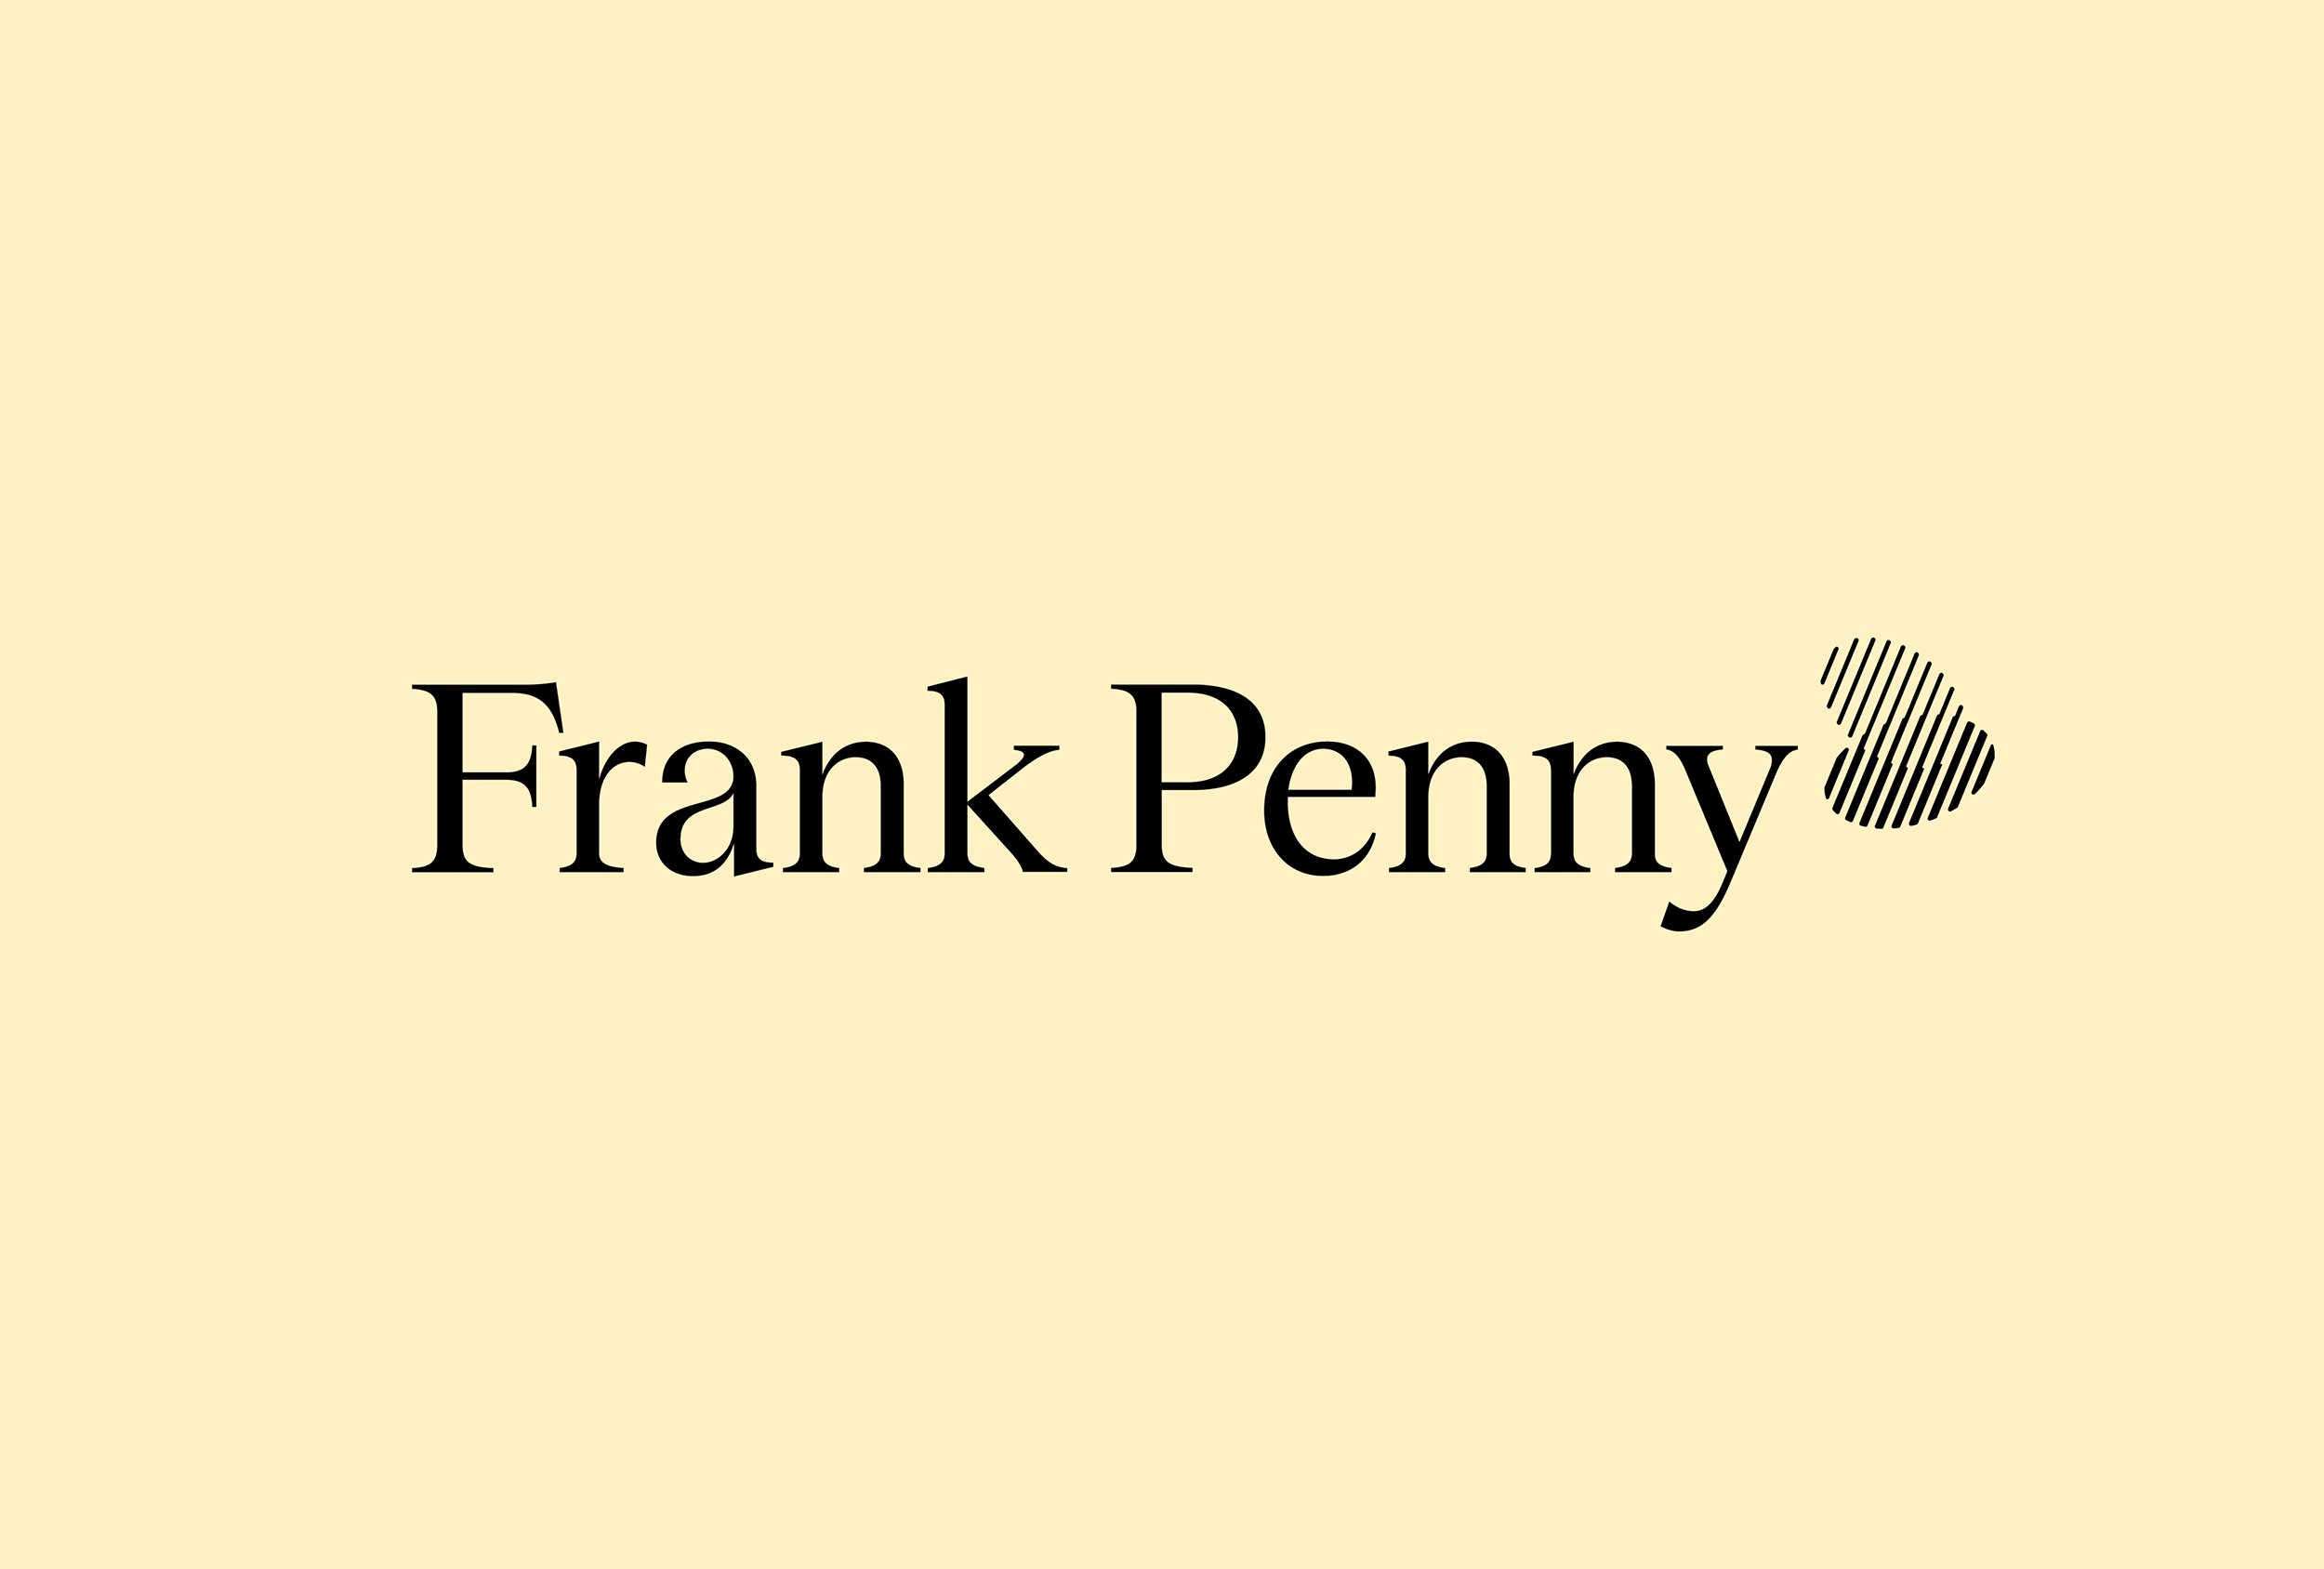 Animated logo, logotype, motion design, patterns and website by Swedish design studio Bedow for anti-money laundering company Frank Penny